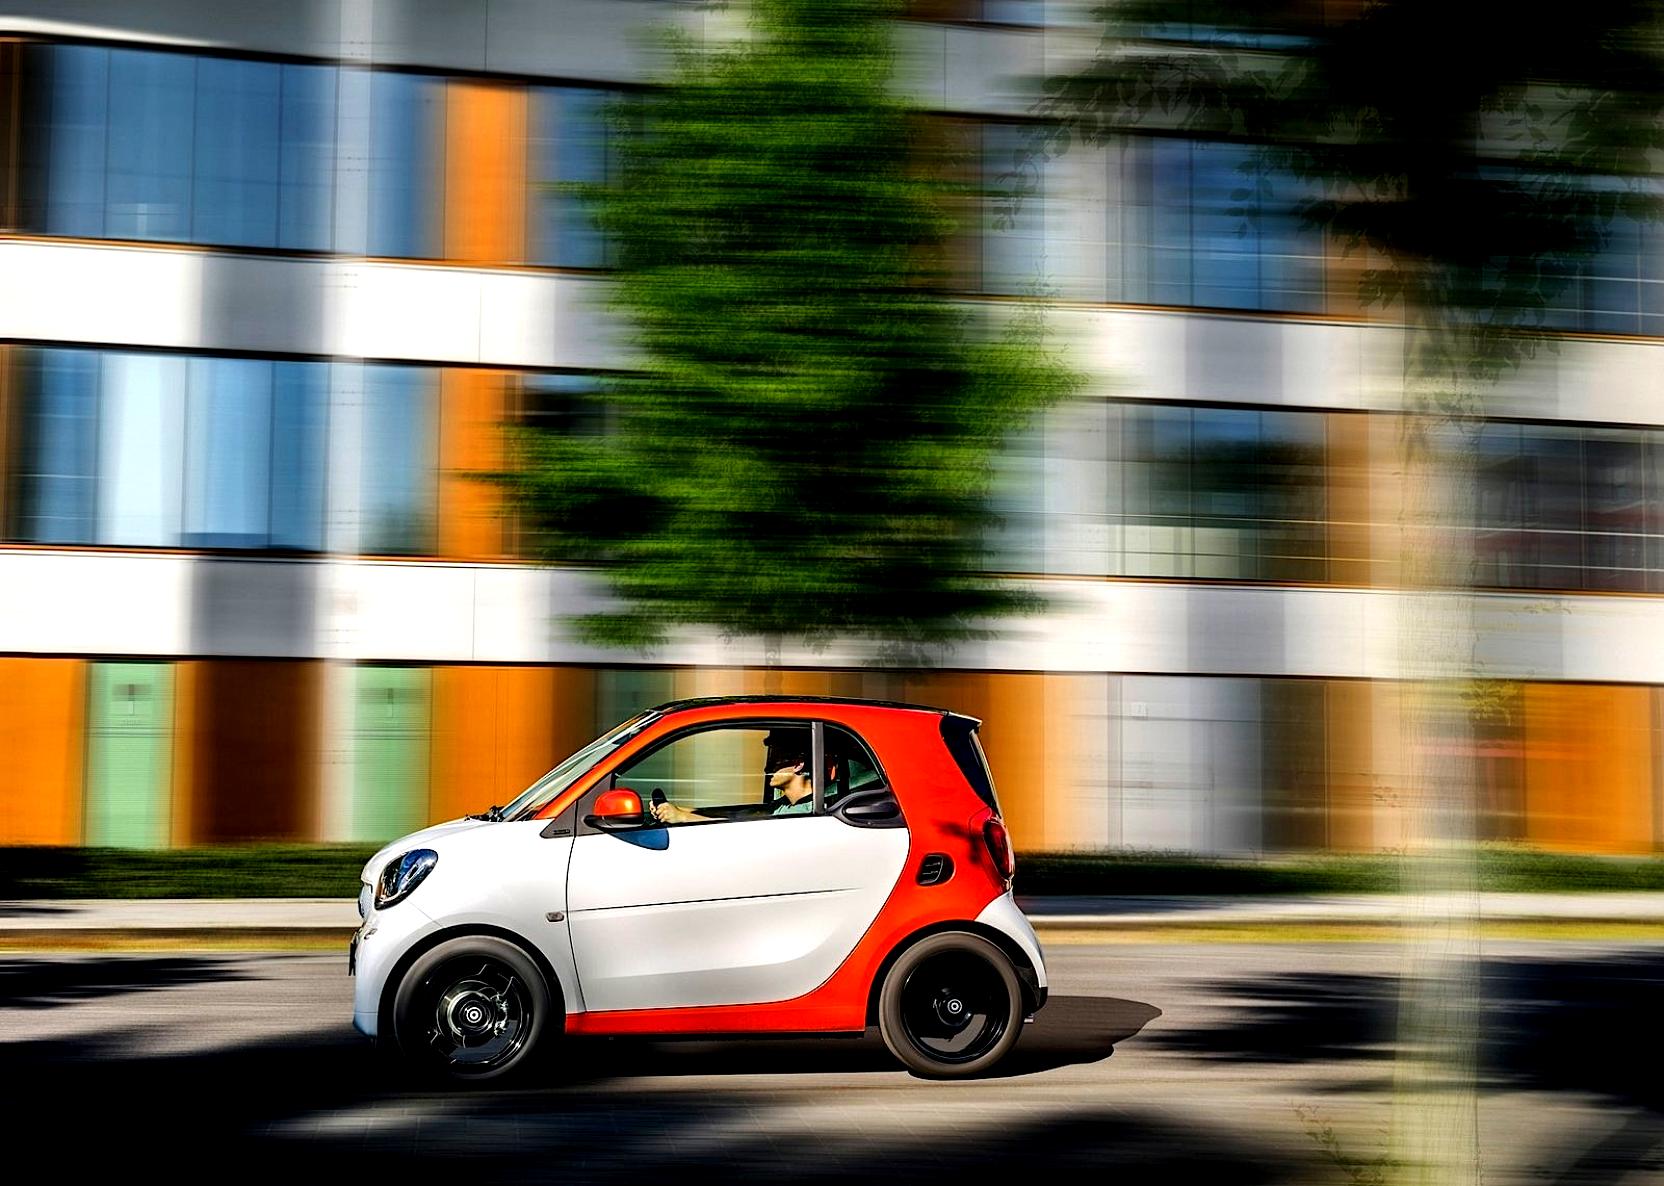 Smart Fortwo 2014 #44